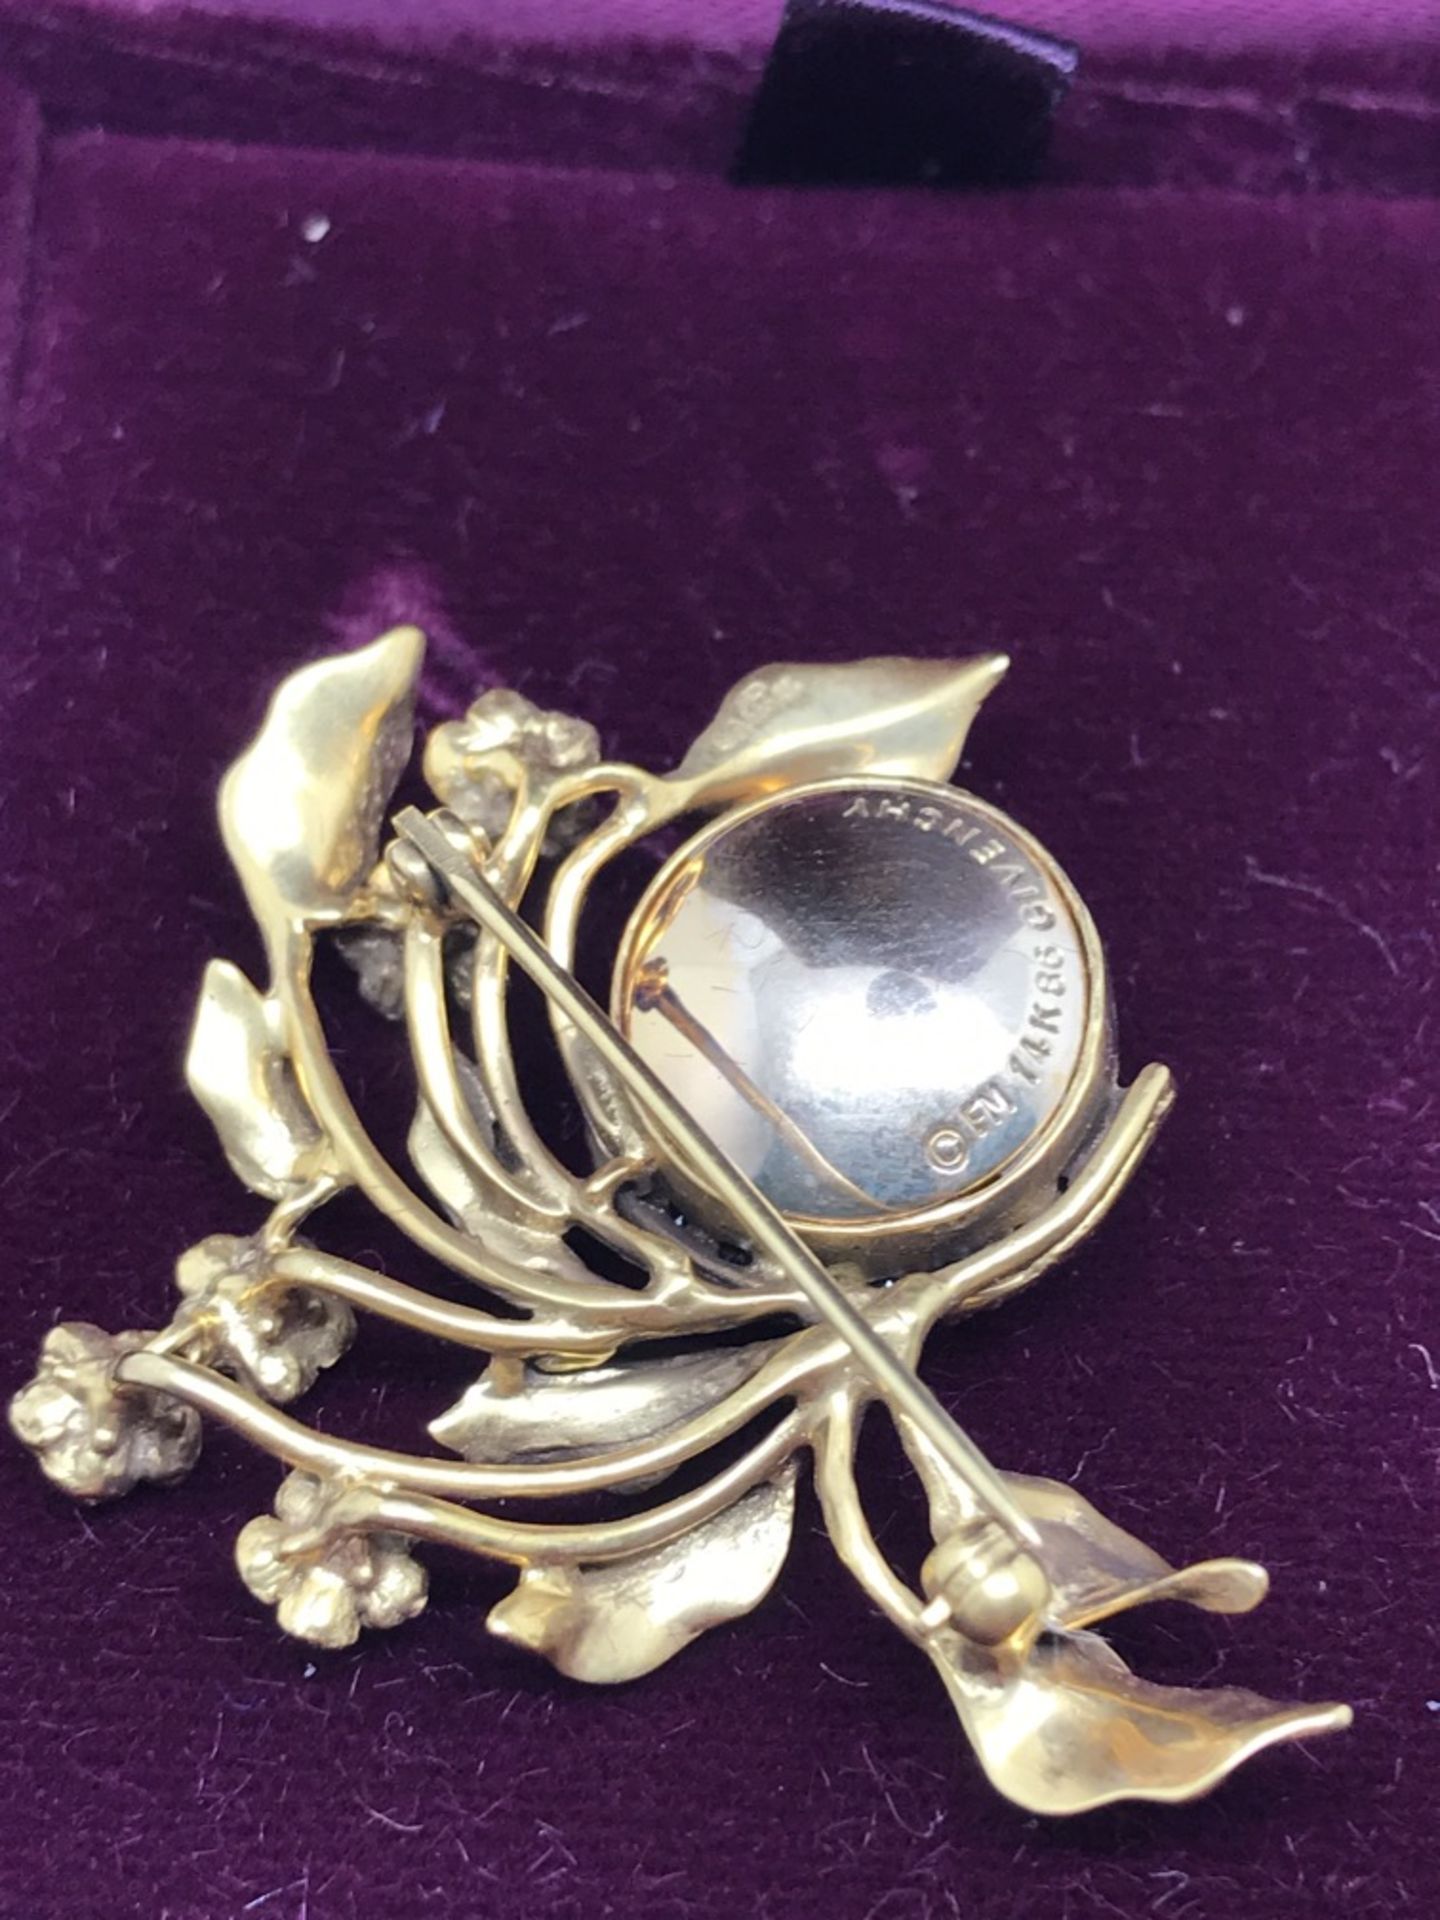 GIVENCHY 14ct GOLD BROOCH - Image 4 of 5